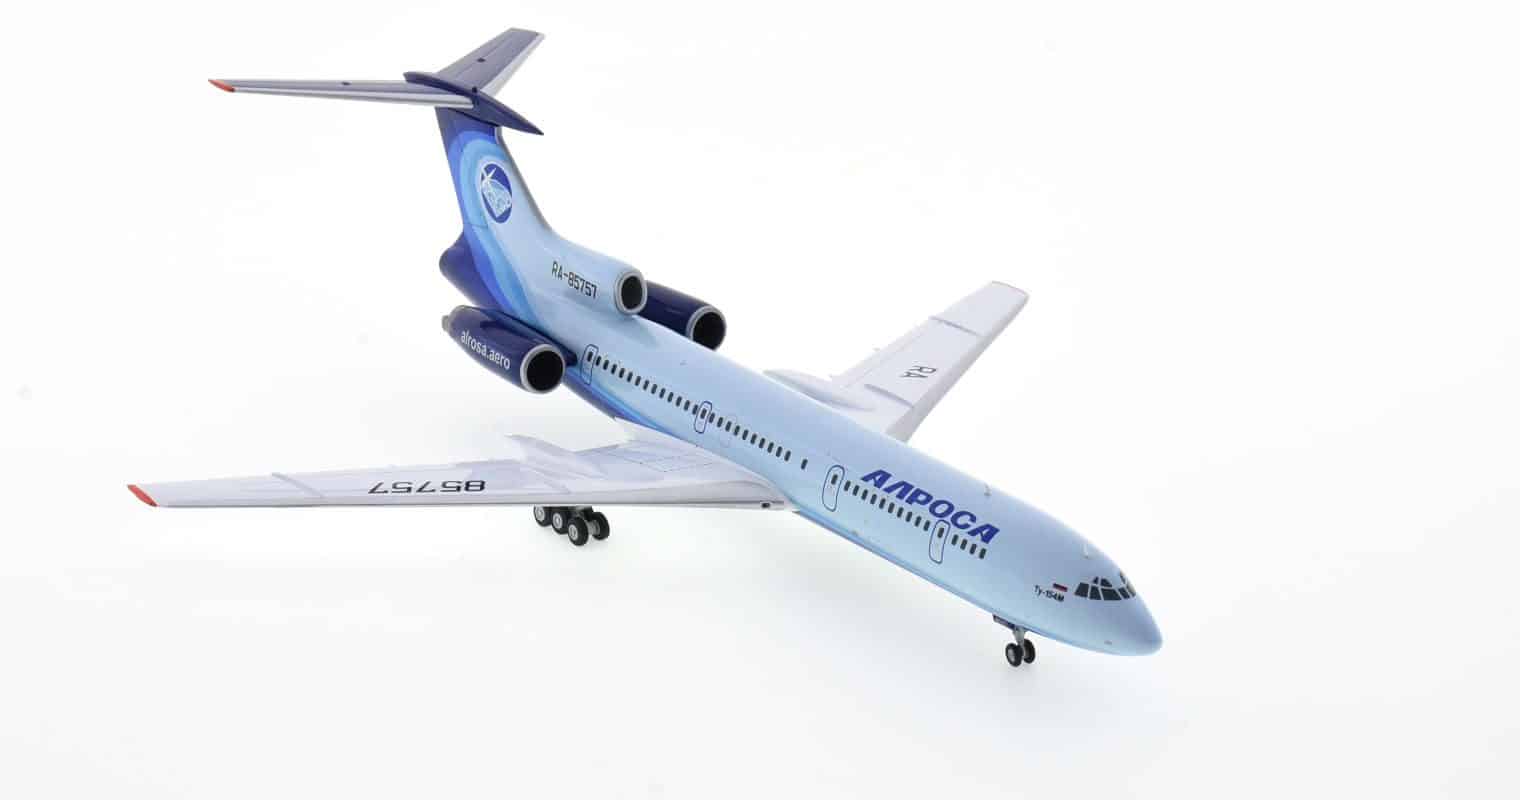 Front starboard side view of Herpa HE571388 - 1/200 scale diecast model of the Tupolev Tu-154M registration RA-85757 in Air Company ALROSA livery, October 2020. This aircraft operated the last commercial flight in Russia of the Tu-154.